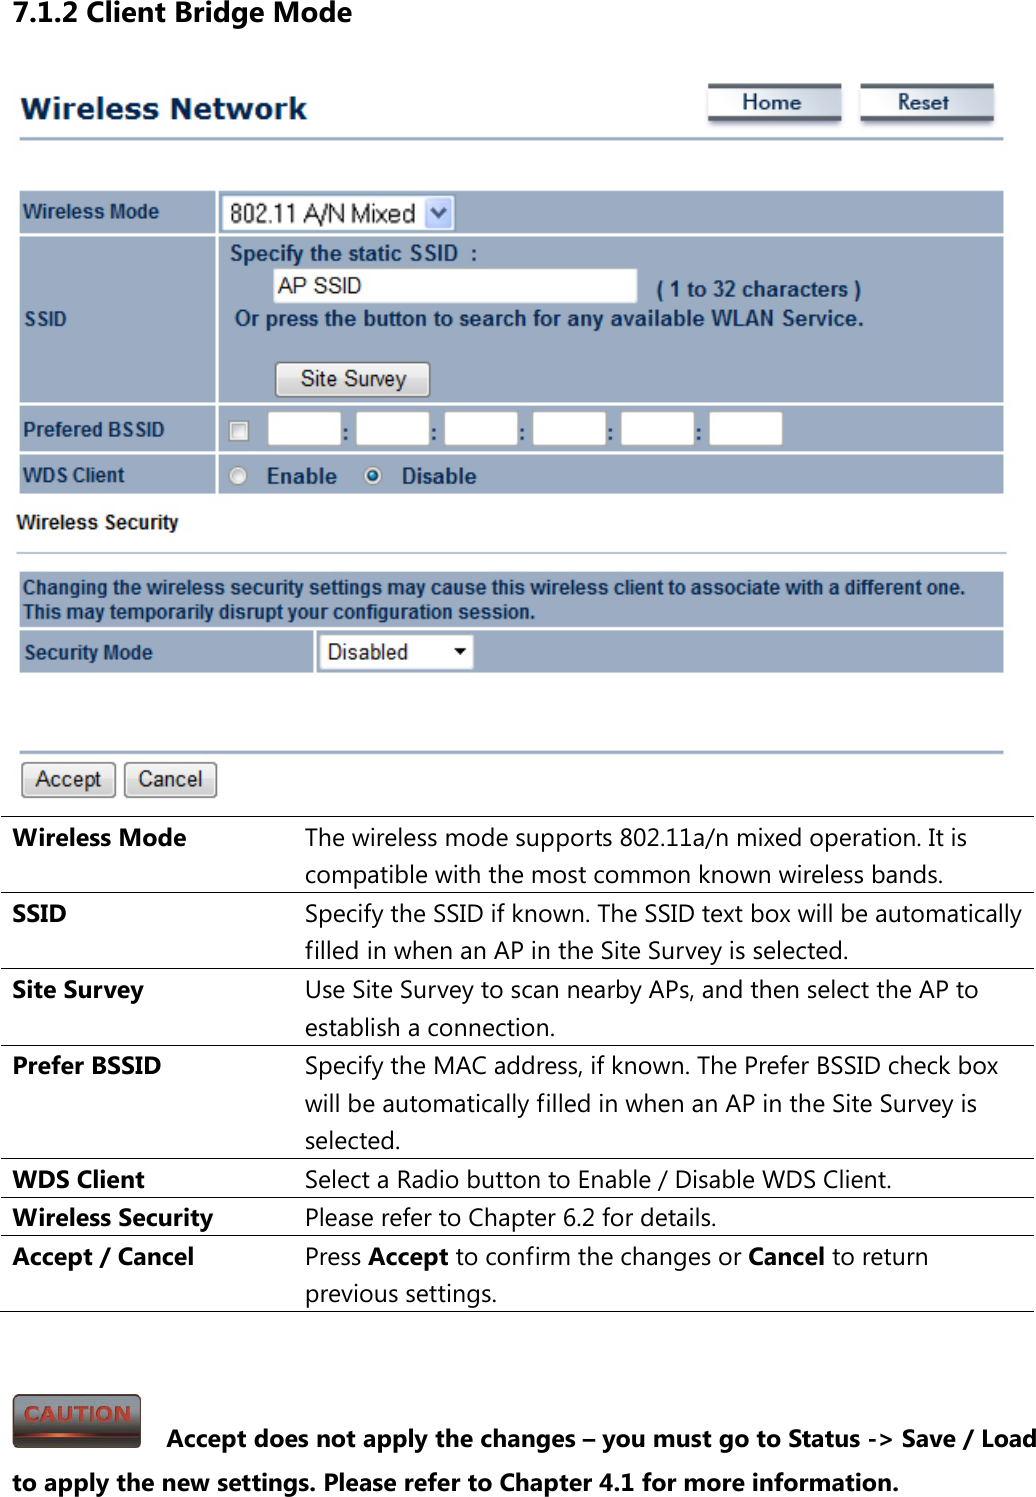 7.1.2 Client Bridge Mode  Wireless Mode The wireless mode supports 802.11a/n mixed operation. It is compatible with the most common known wireless bands. SSID  Specify the SSID if known. The SSID text box will be automatically filled in when an AP in the Site Survey is selected. Site Survey Use Site Survey to scan nearby APs, and then select the AP to establish a connection. Prefer BSSID Specify the MAC address, if known. The Prefer BSSID check box will be automatically filled in when an AP in the Site Survey is selected. WDS Client Select a Radio button to Enable / Disable WDS Client. Wireless Security Please refer to Chapter 6.2 for details. Accept / Cancel Press Accept to confirm the changes or Cancel to return previous settings.     Accept does not apply the changes – you must go to Status -&gt; Save / Load to apply the new settings. Please refer to Chapter 4.1 for more information. 